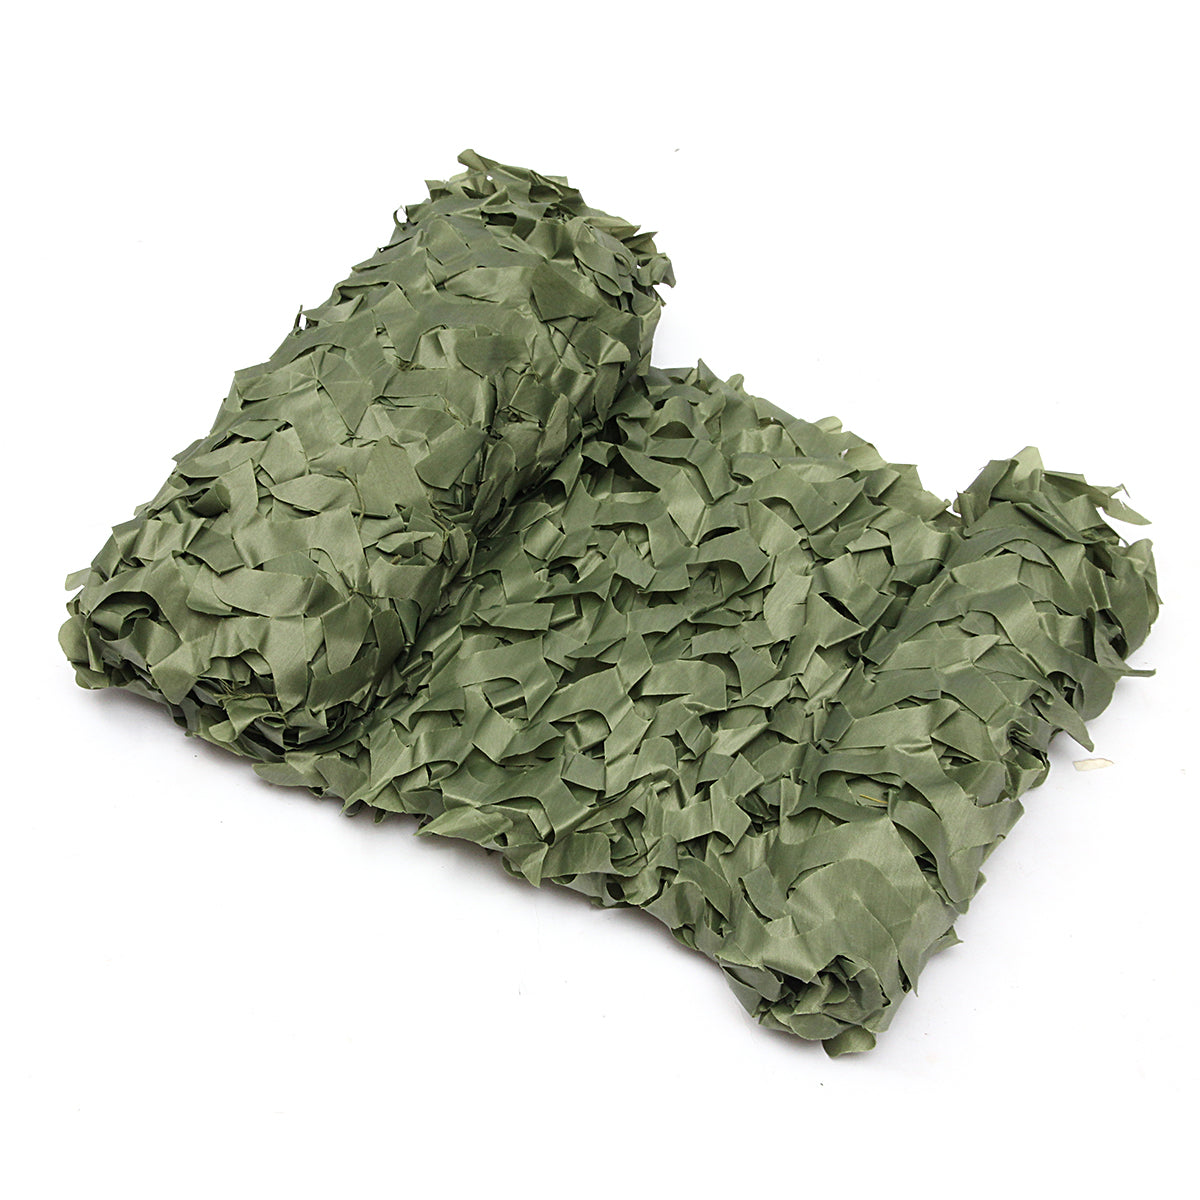 Dim Gray 4mX2m Camo Netting Camouflage Net for Car Cover Camping Woodland Military Hunting Shooting